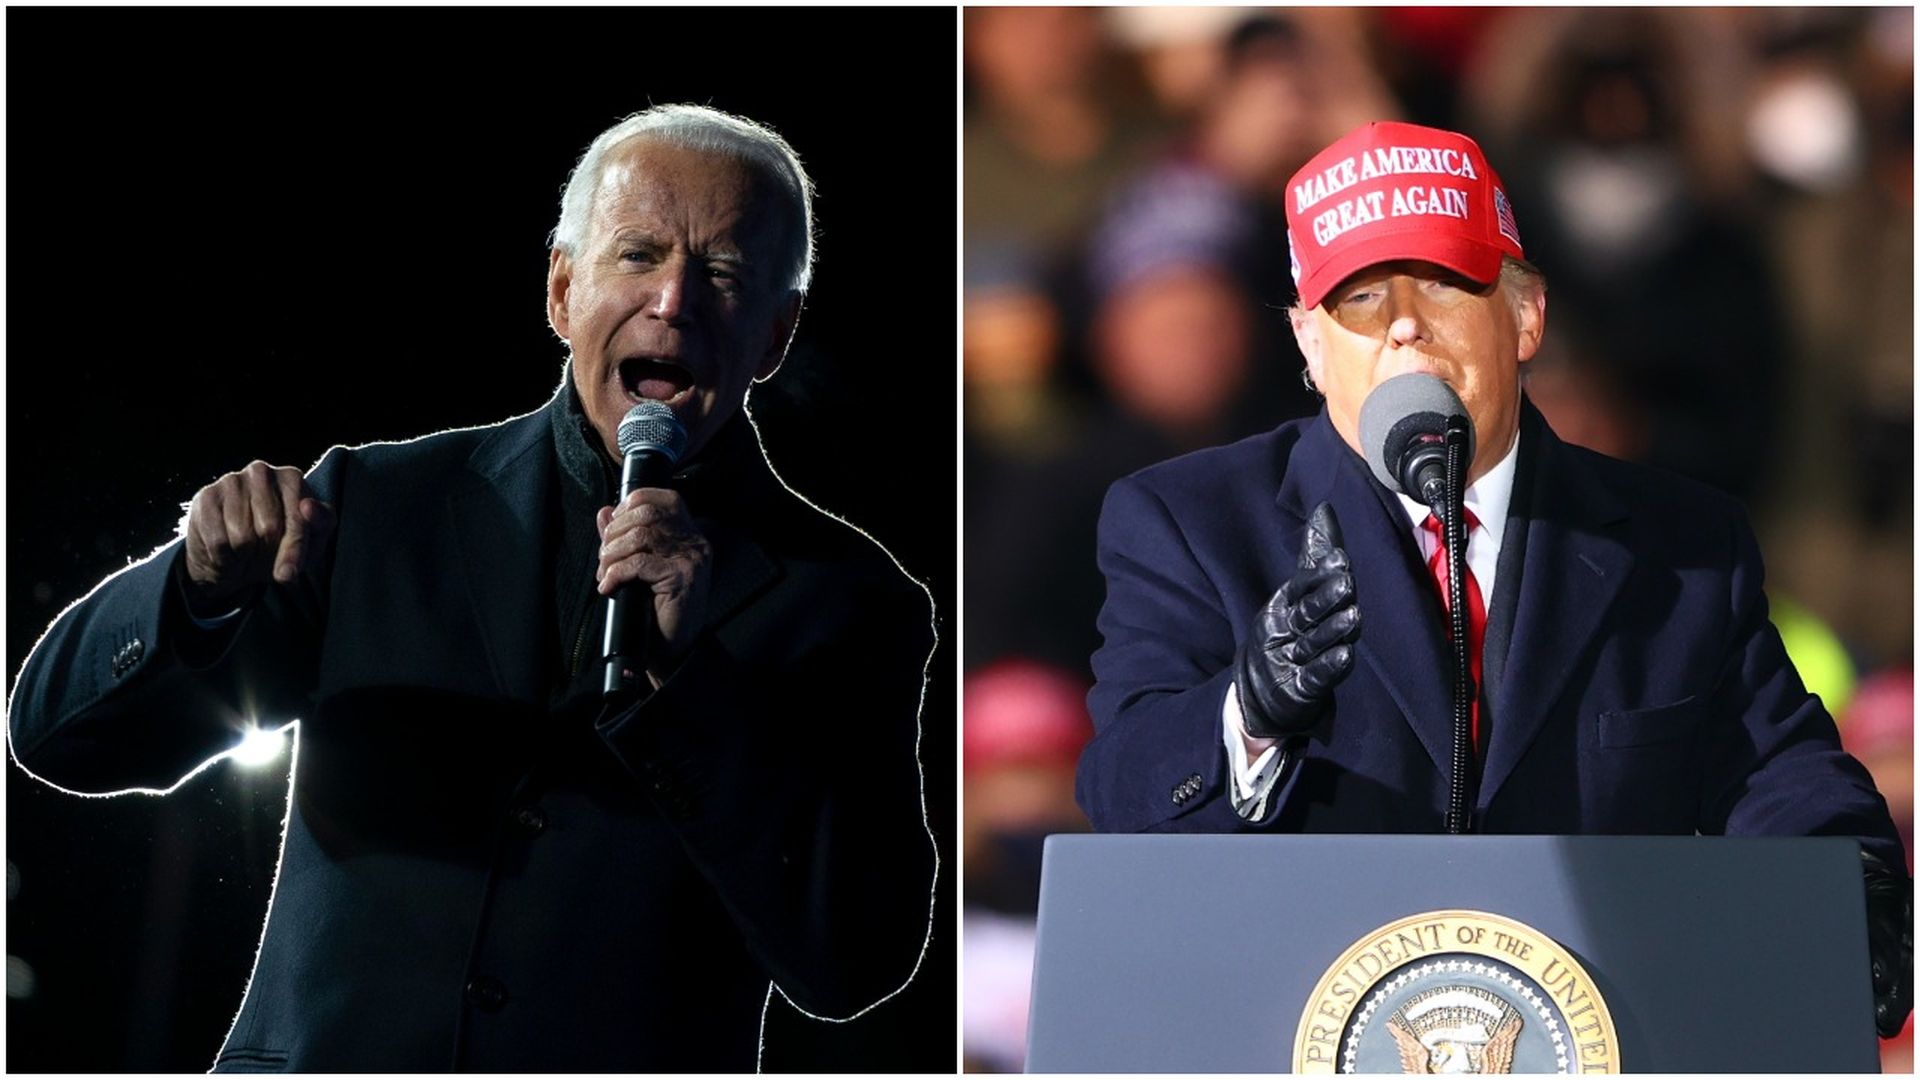 Democratic presidential nominee Joe Biden speaks during a drive-in rally in Pittsburgh, Pennsylvania, and President Trump at his campaign event in Traverse City, Michigan, on Nov. 2.